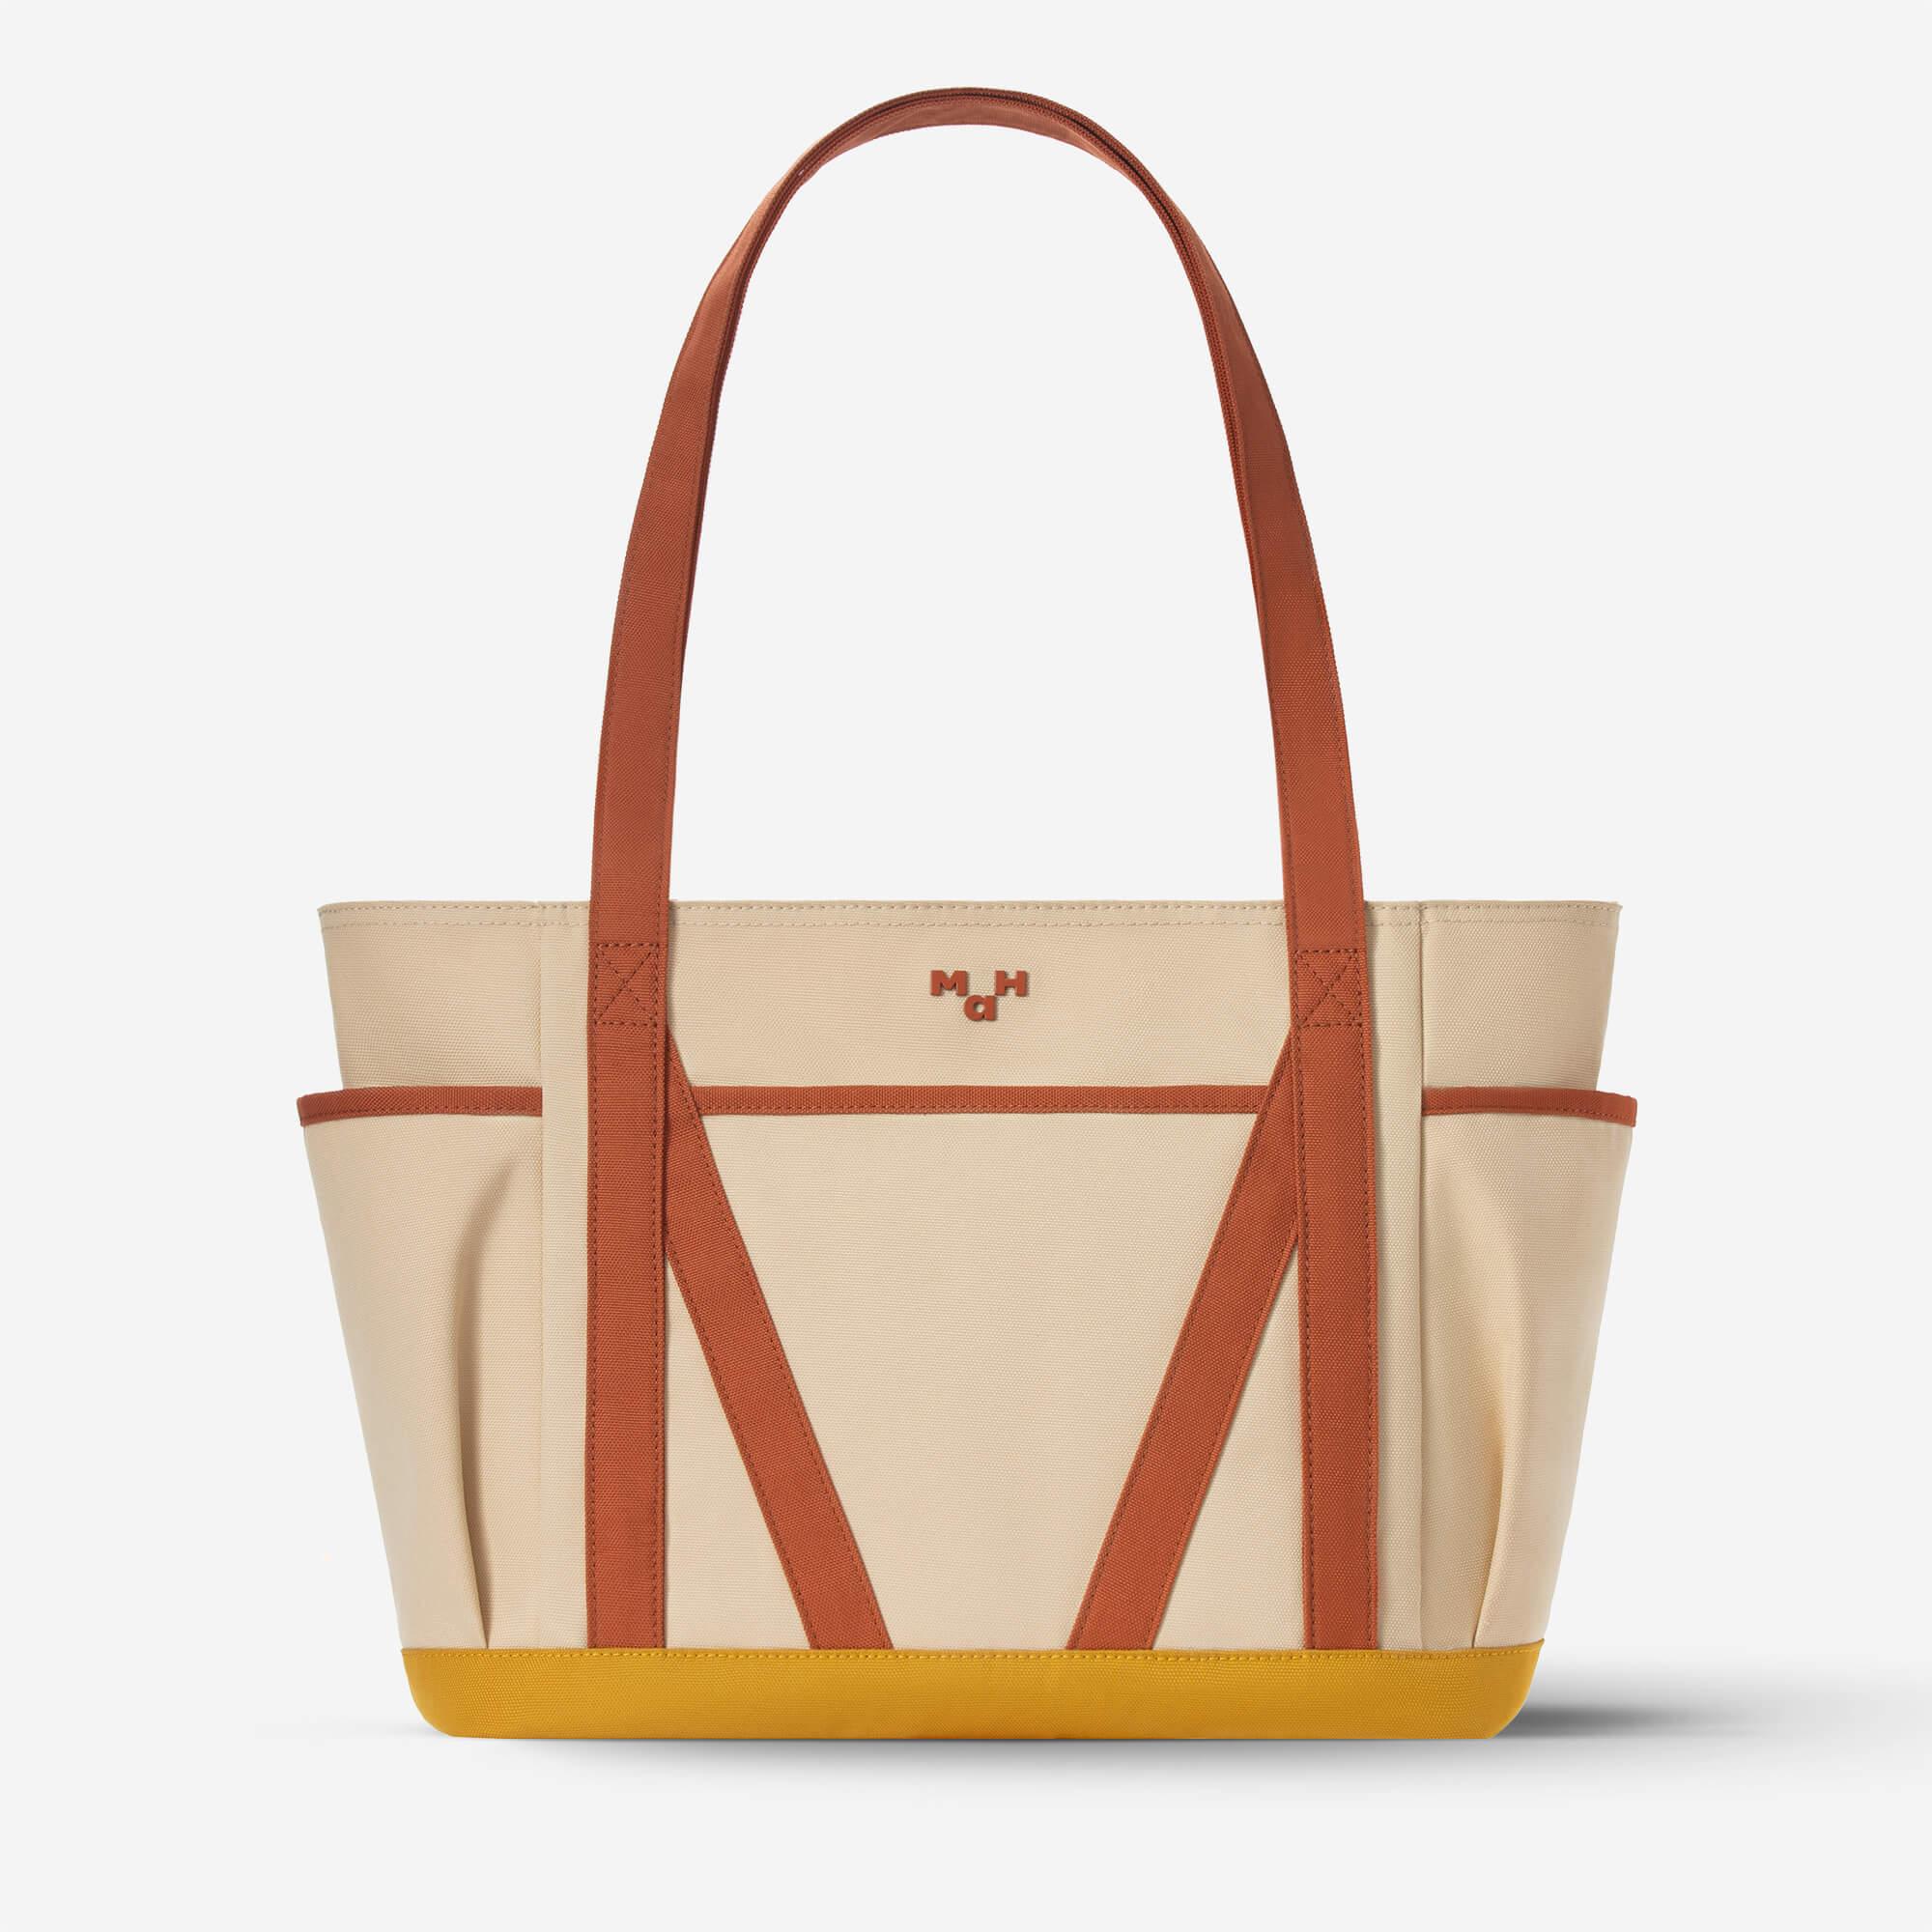 MaH Beige Canvas Tote Bag For Travel